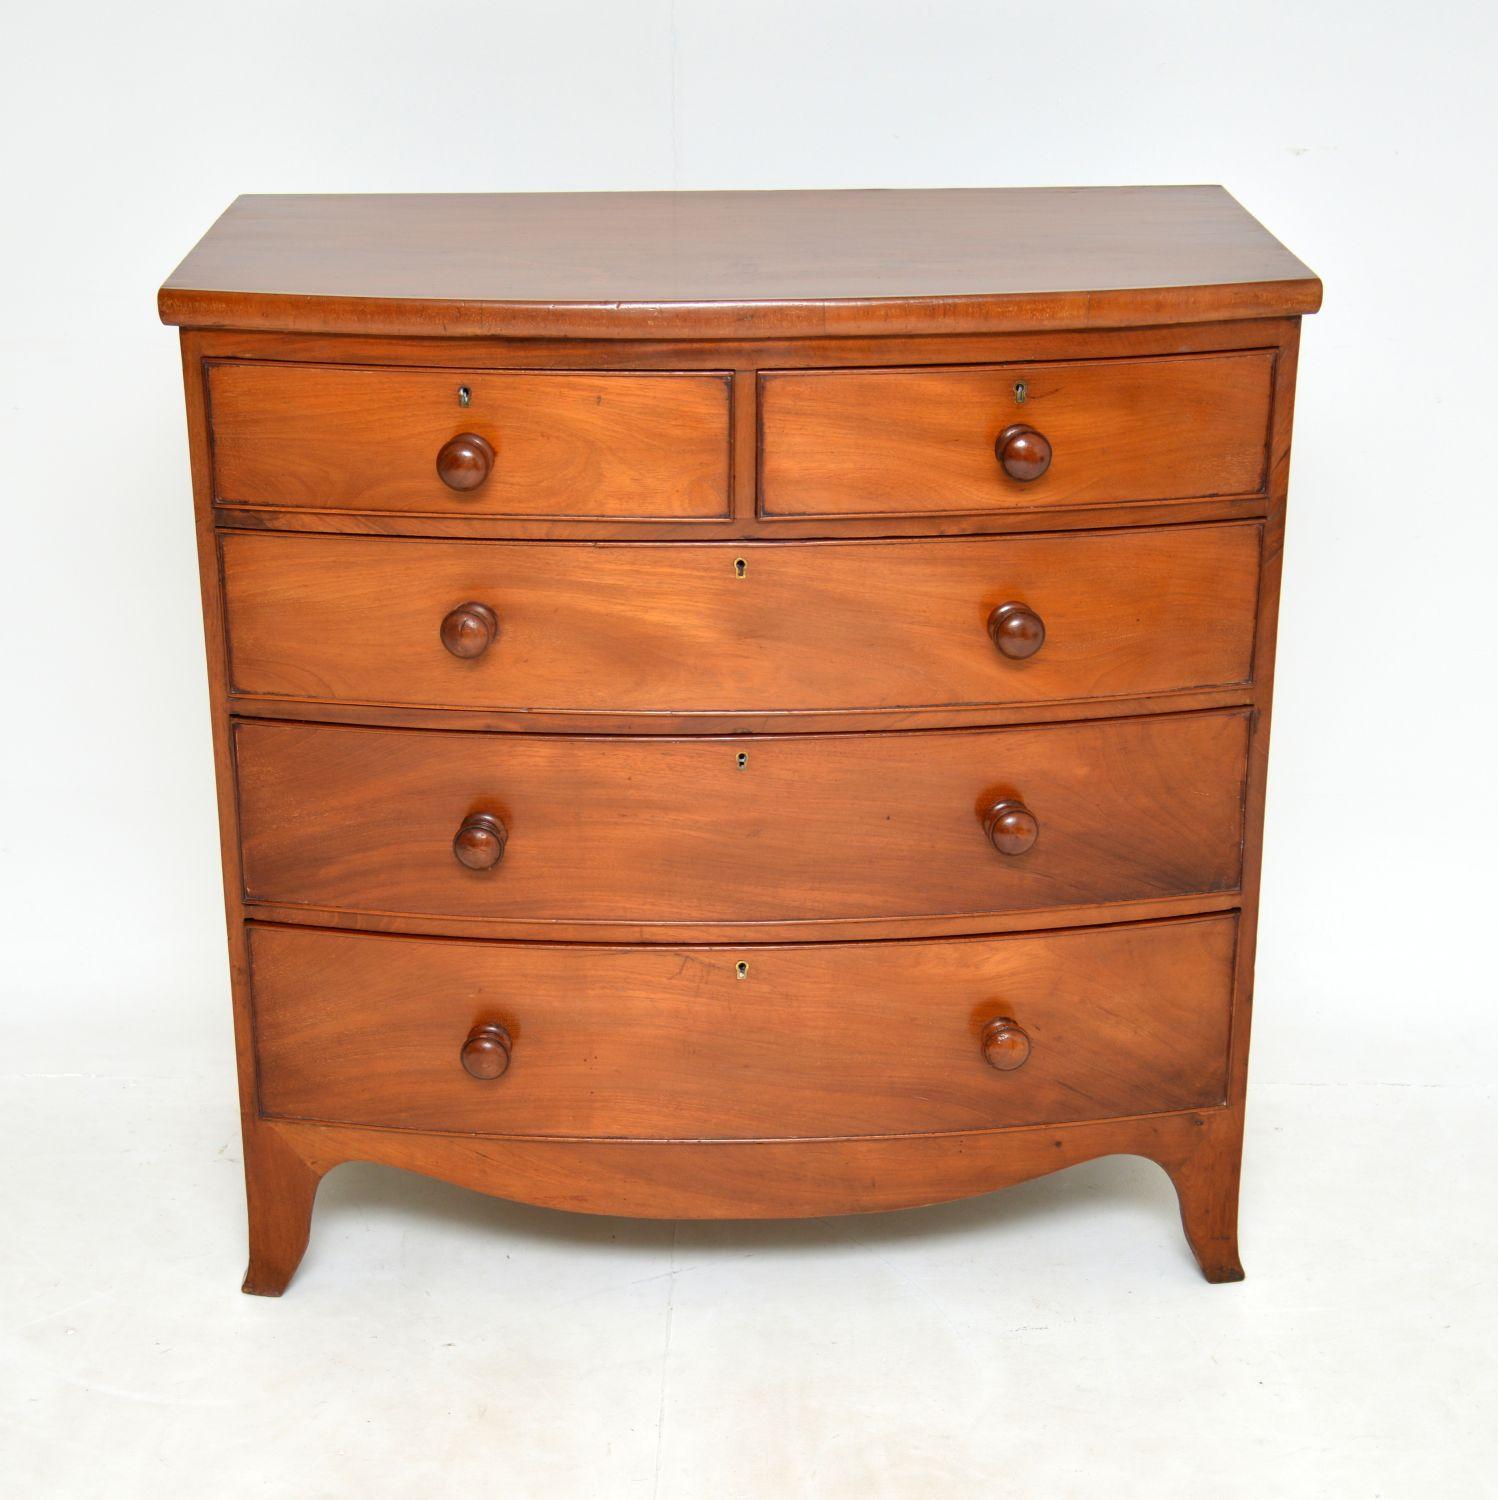 A smart and useful large bow front Georgian chest of drawers. This was made in England, it dates from around the 1810-1830 period.
This is very well made and is a great size, with lots of storage space. It has lovely turned solid wood handles and